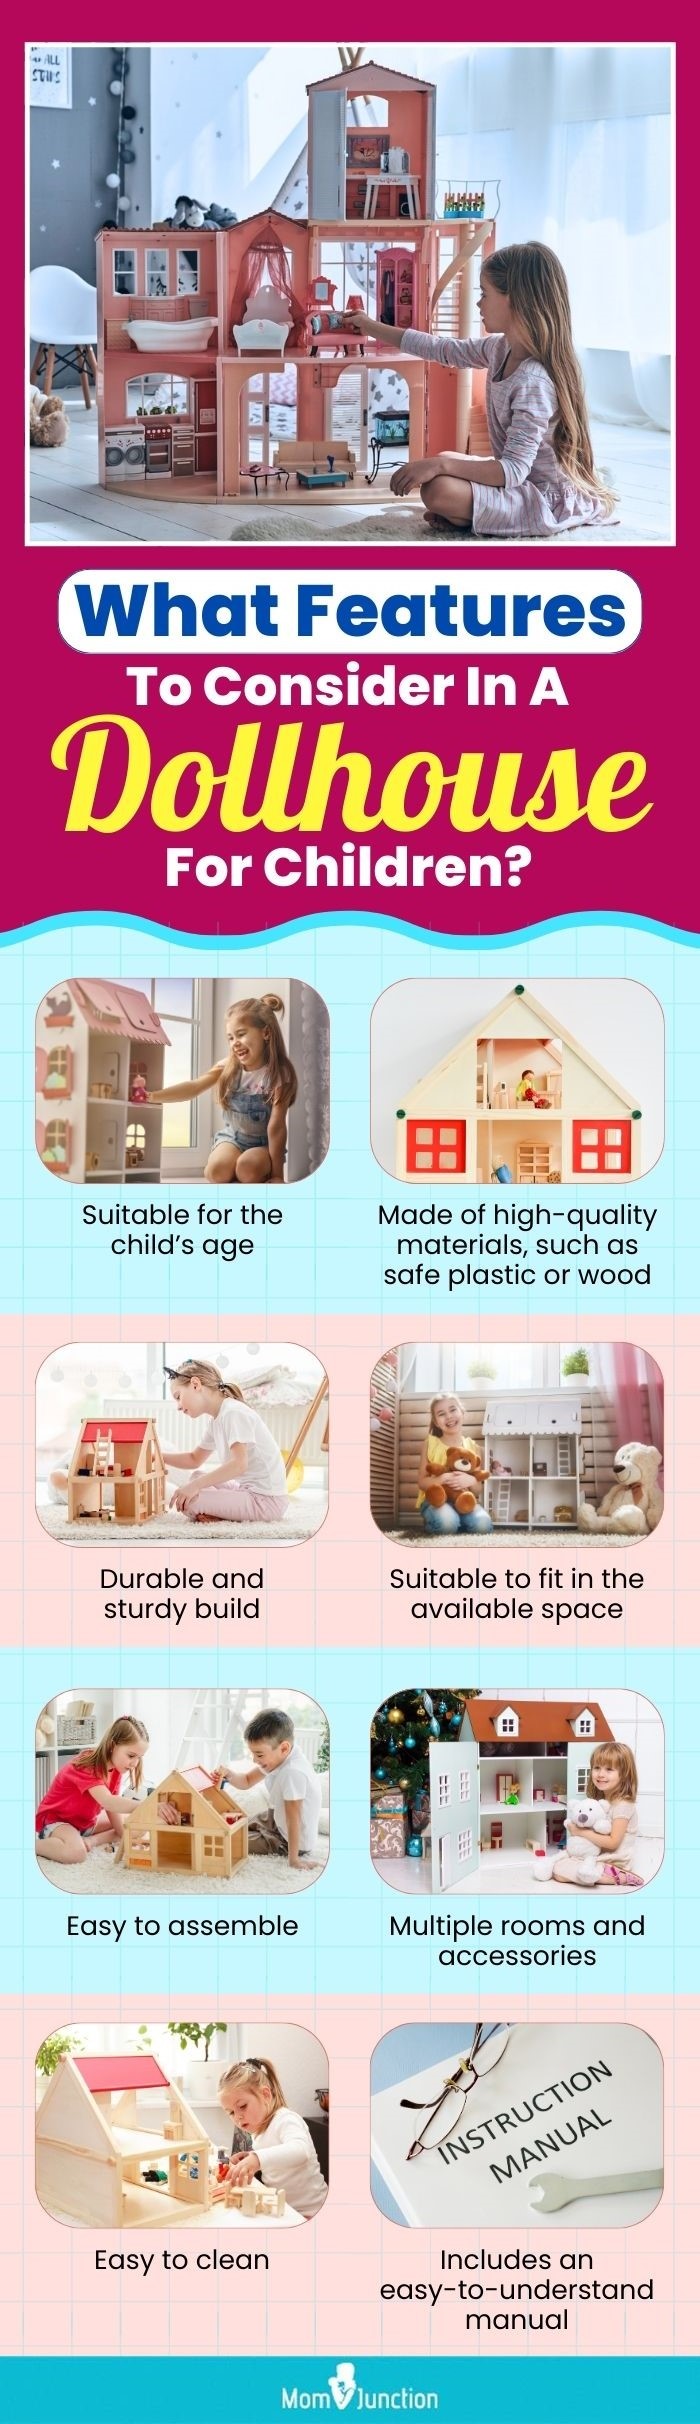 What Features To Consider In A Dollhouse For Children? (infographic)